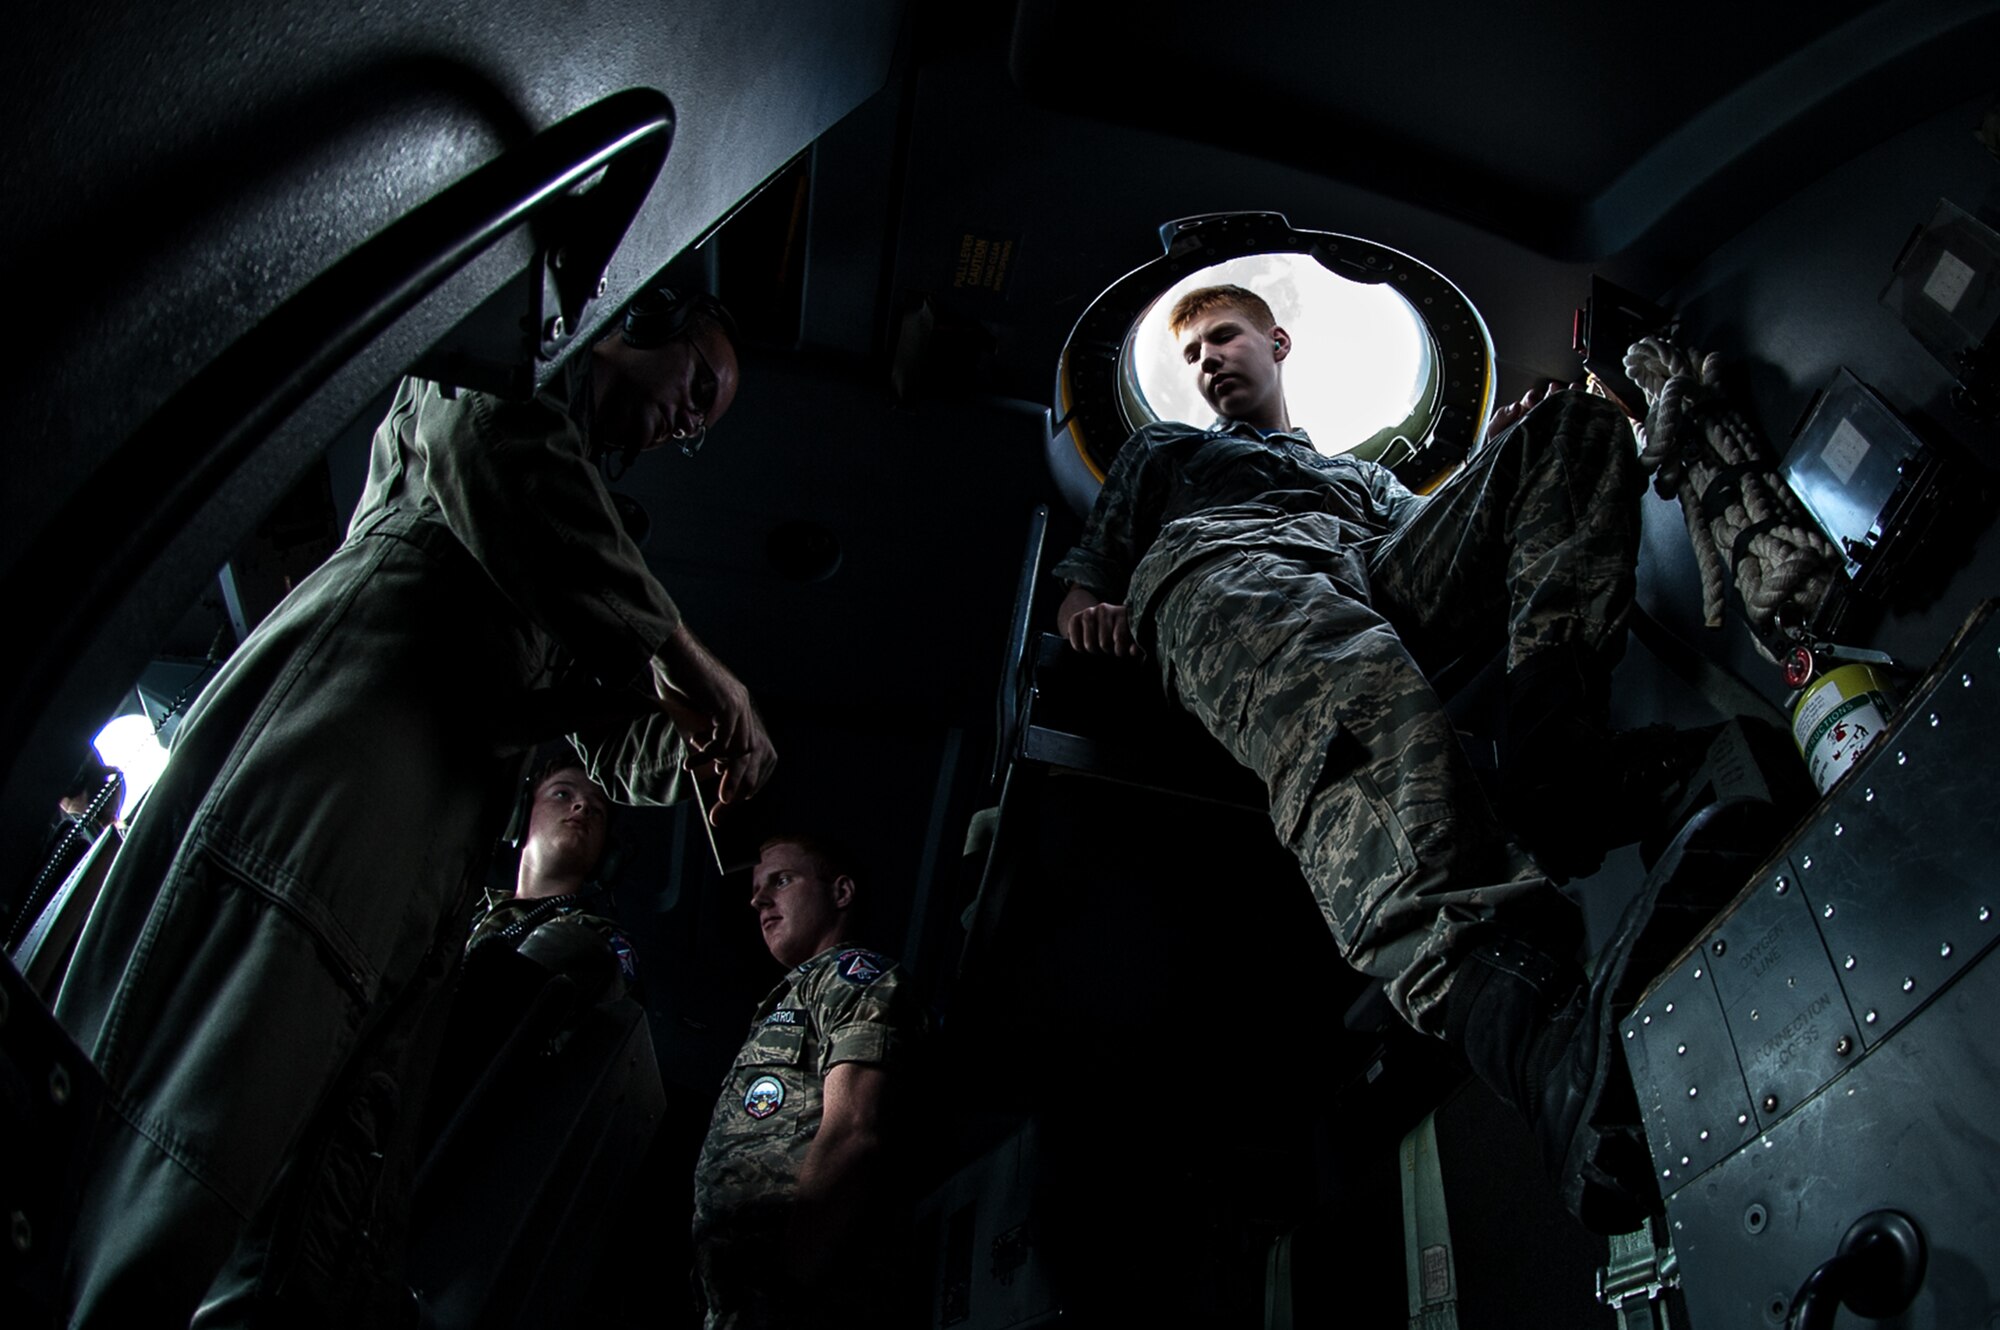 Civil Air Patrol Cadet Master Sgt. Ryan Stein, Wiesbaden Cadet Flight, sits in the bubble of a C-130J Super Hercules assigned to the 37th Airlift Squadron on Ramstein Air Base, during a flight over Rheinland-Pfalz, Germany, June 20, 2017. The bubble allows people to look out of the top of the aircraft to get a 360 degree perspective. Cadets took turns looking out of the bubble so they could each enjoy the view. (U.S. Air Force photo by Senior Airman Devin Boyer)